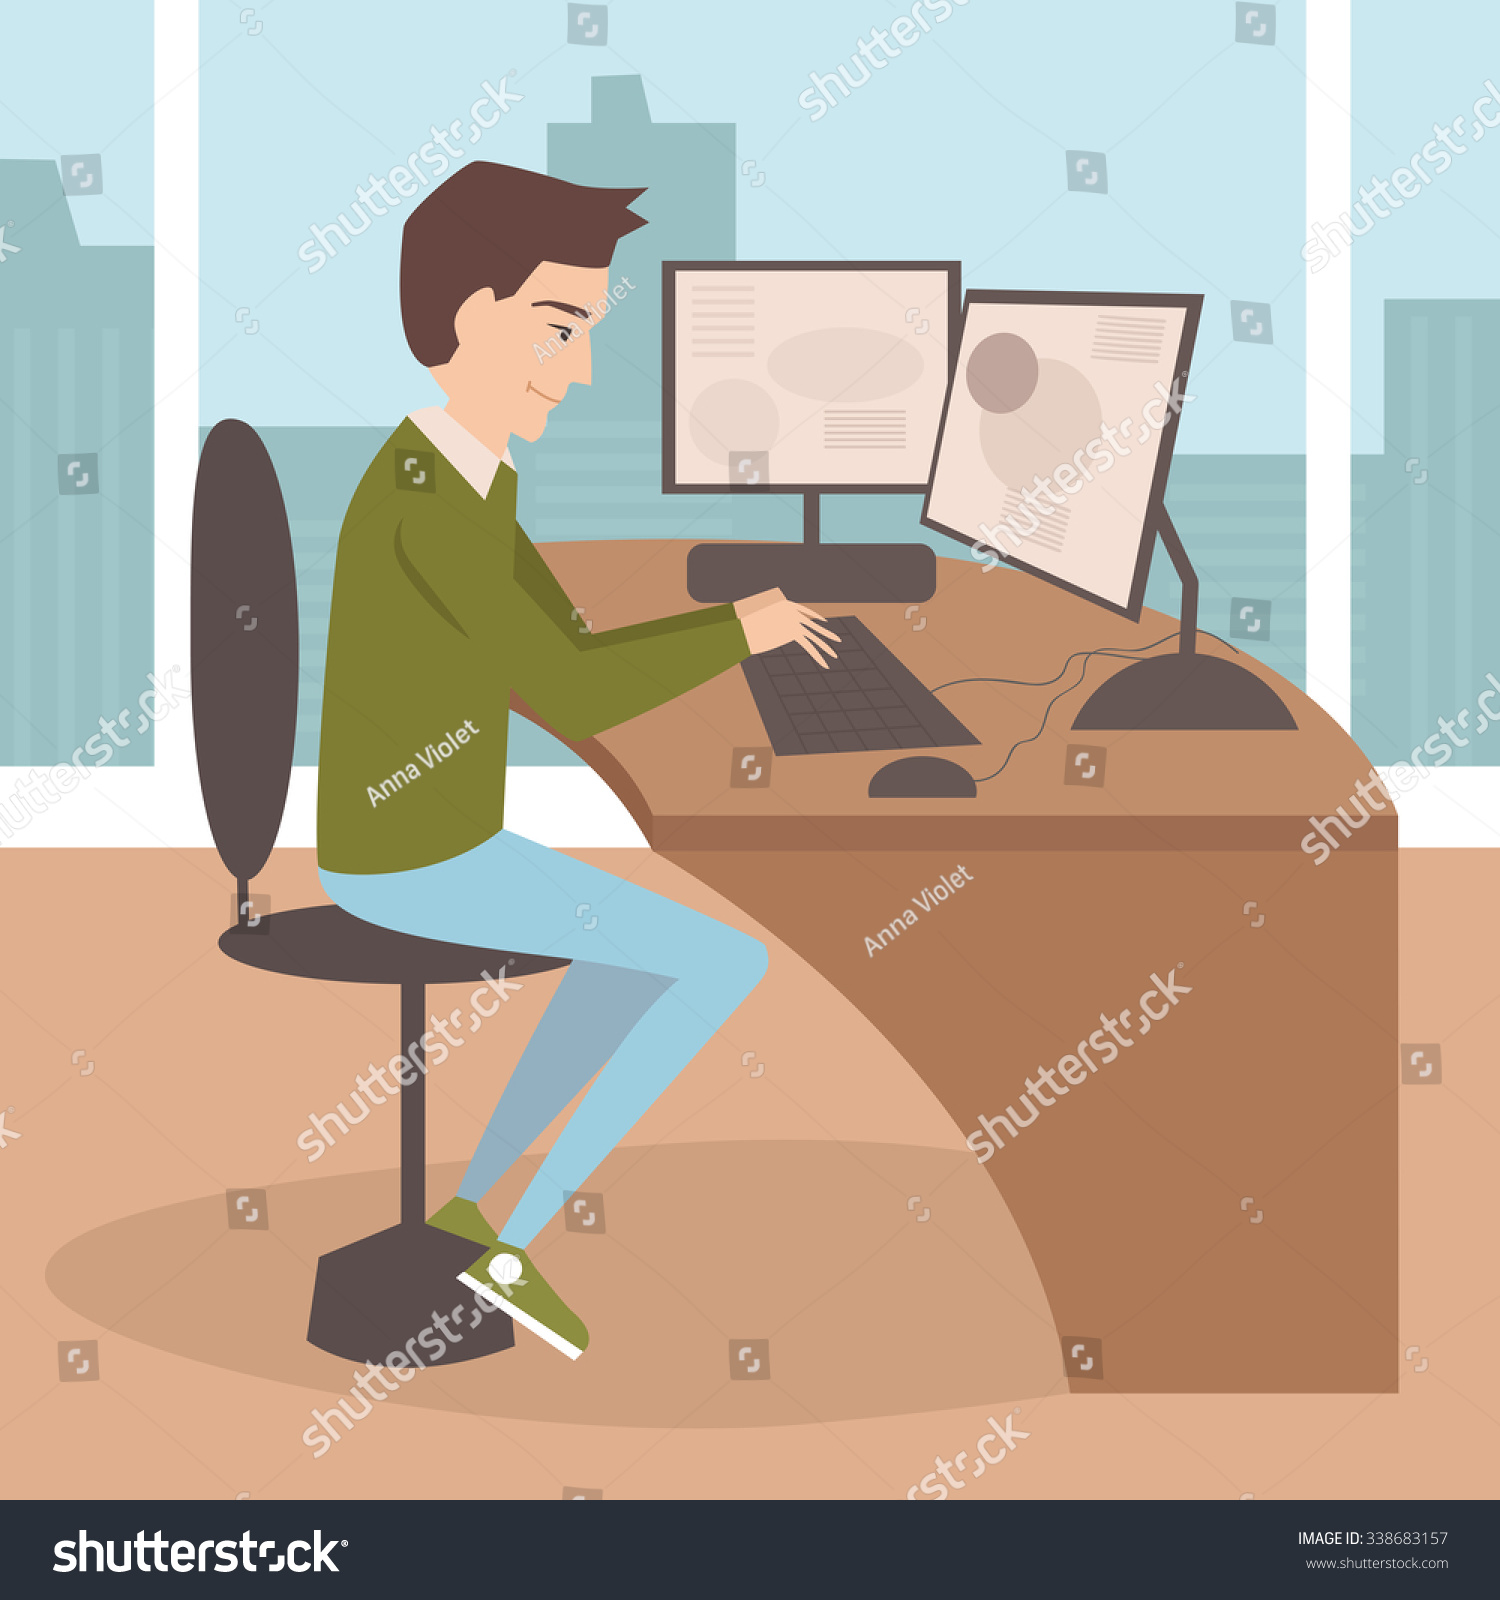 stock vector programmer games developer the man behind the computer vector isolated illustration cartoon 338683157